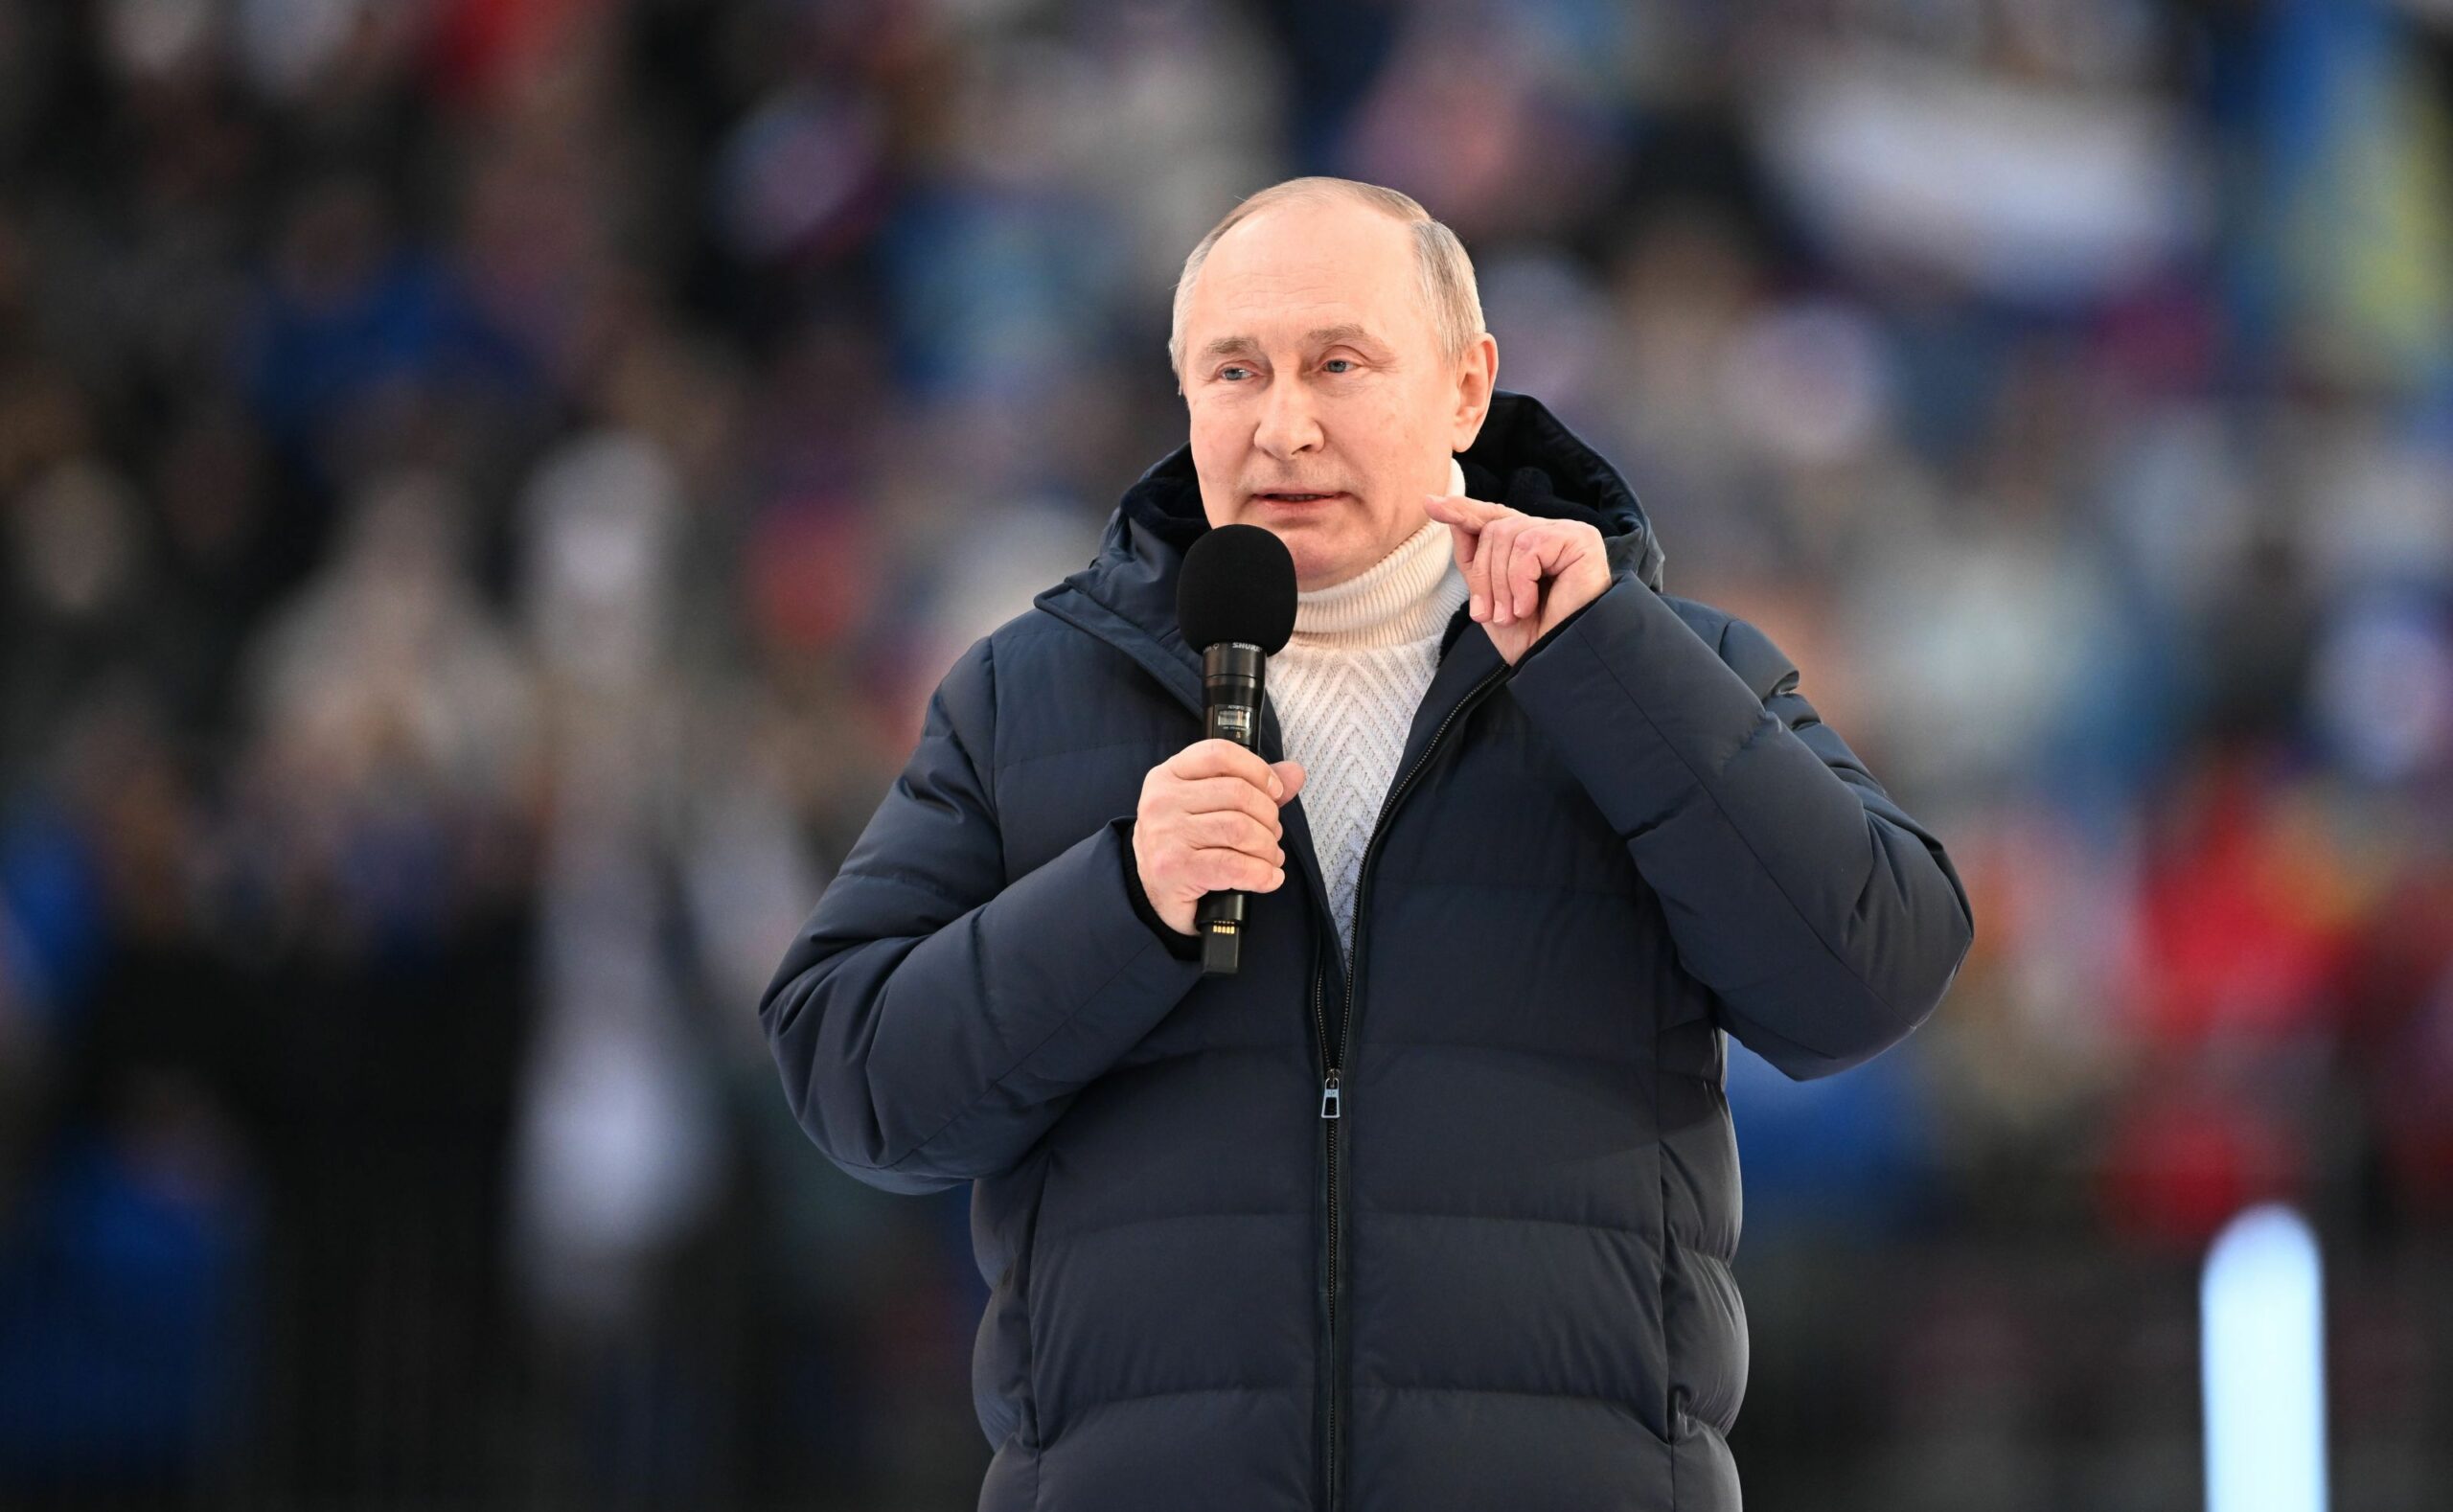 8143882 18.03.2022 Russian President Vladimir Putin addresses the audience during a concert marking the 8th anniversary of the referendum on the state status of Crimea and Sevastopol and its reunification with Russia, at Luzhniki Stadium in Moscow, Russia. Ramil Sitdikov / Sputnik